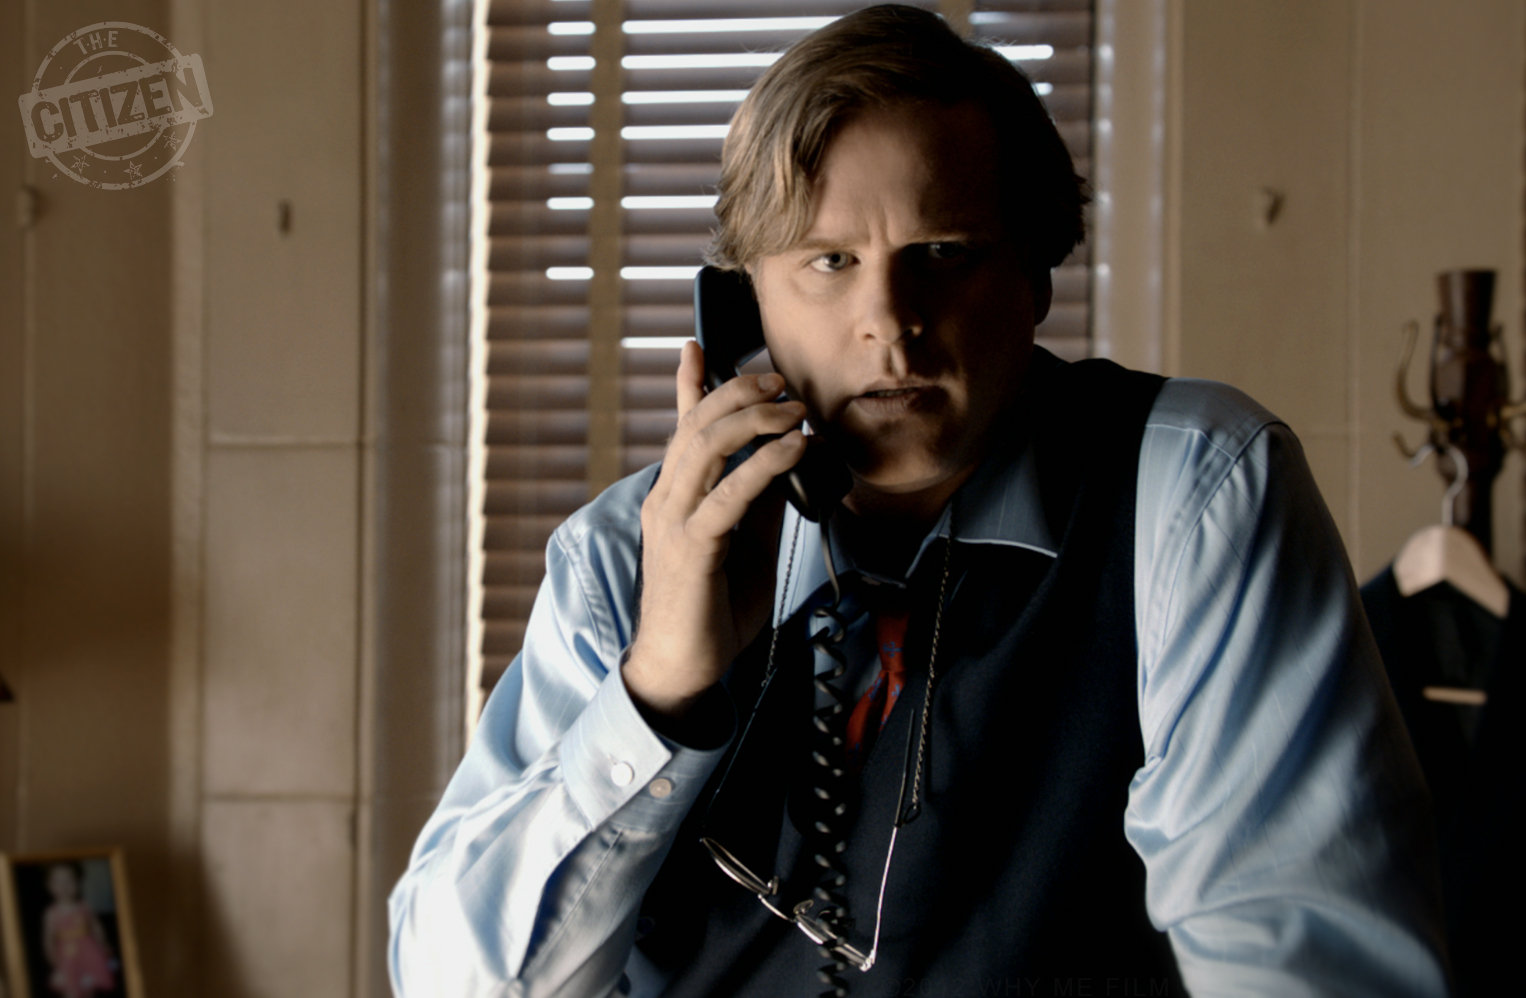 Cary Elwes in THE CITIZEN